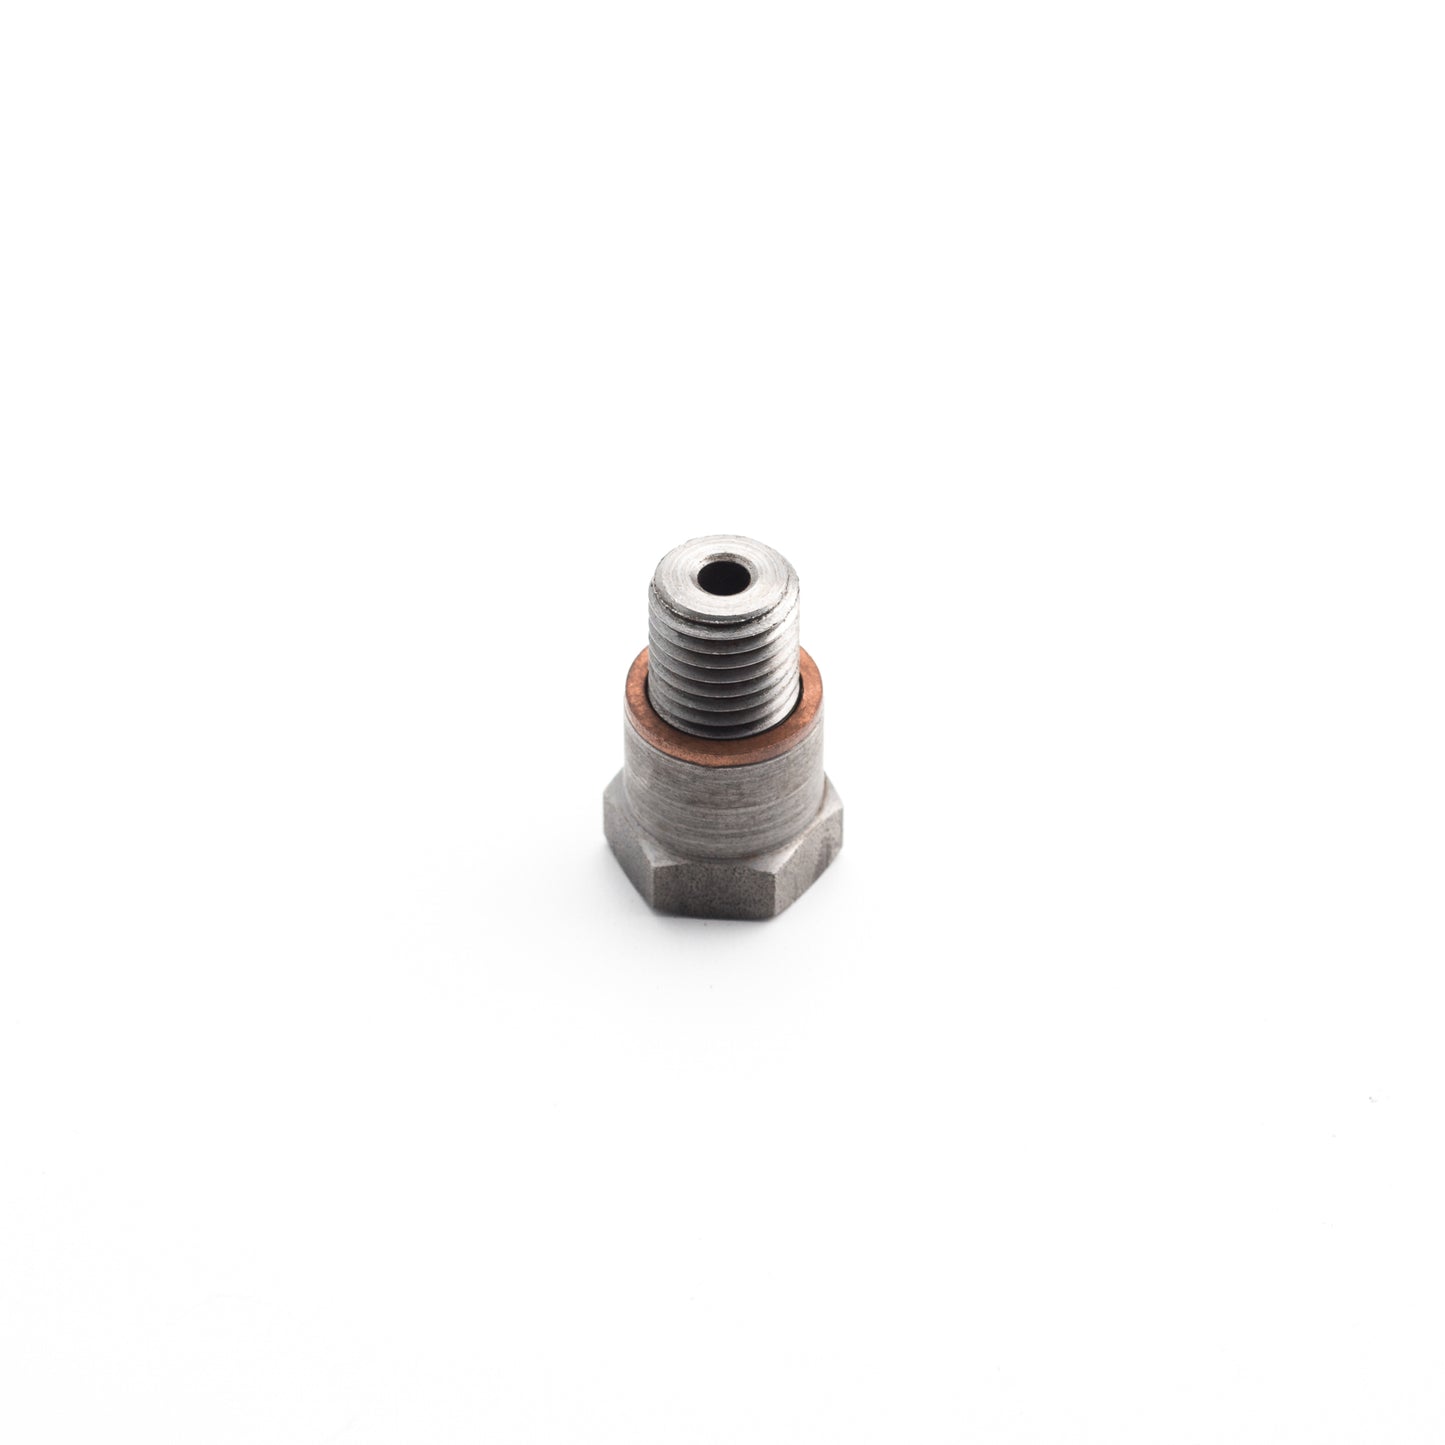 ADAPTER M12x1.5 for Oil Pressure (Heavy Duty)